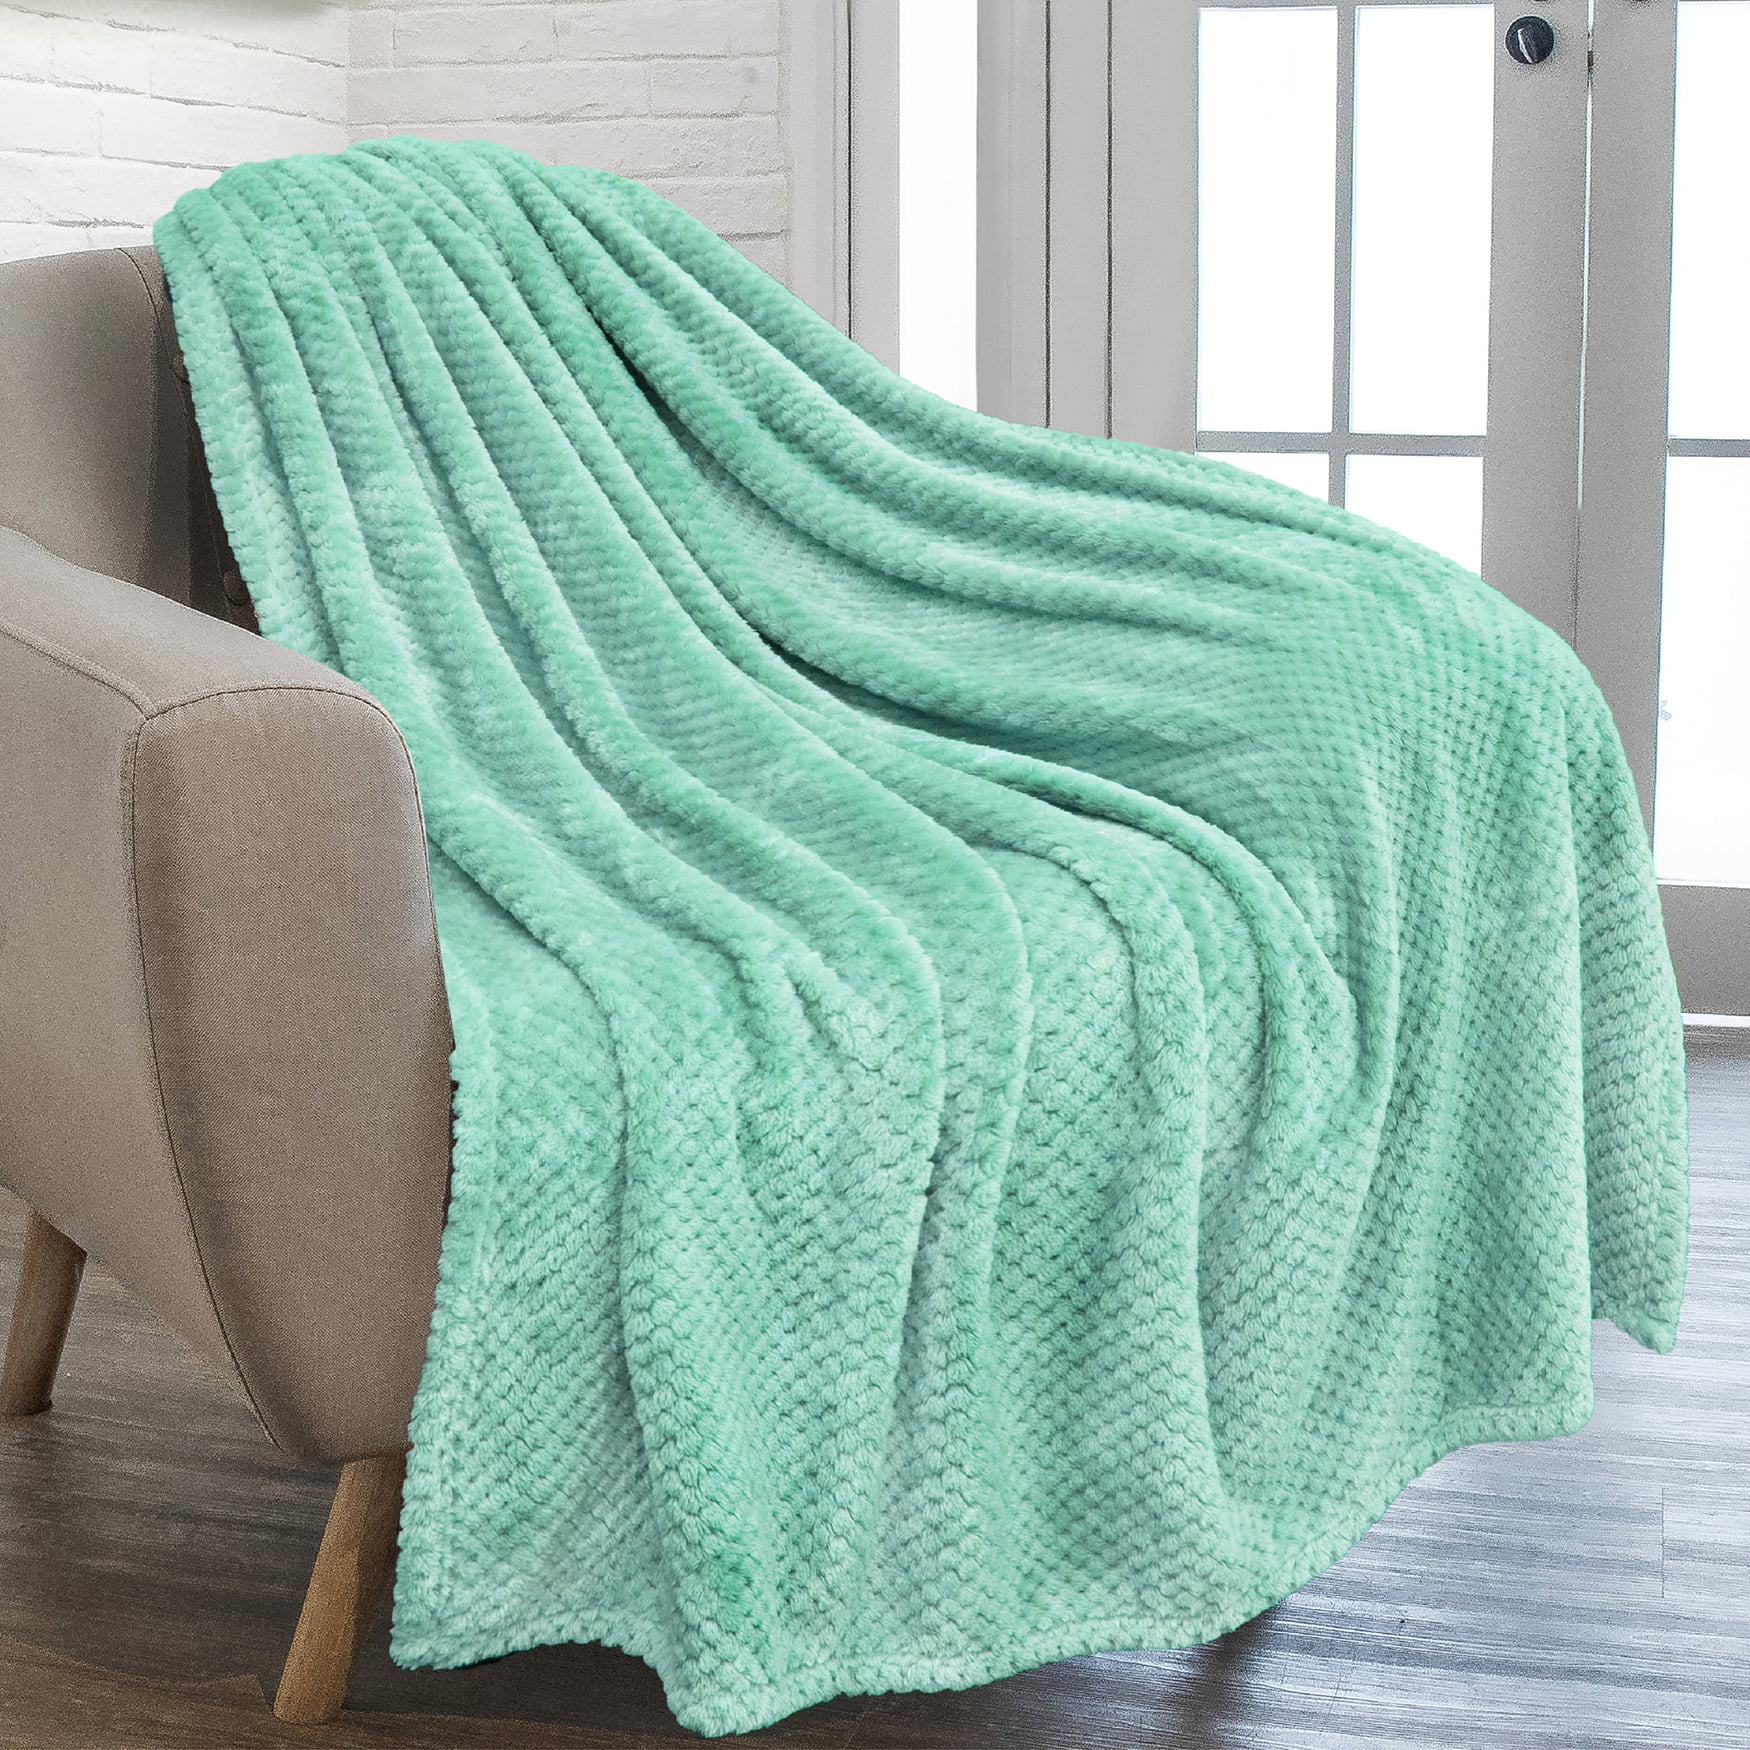 50 x 70 Ambesonne Feathers Soft Flannel Fleece Throw Blanket Cozy Plush for Indoor and Outdoor Use Fluffy Feather in Symmetrical Tile Pattern with Color Details Salmon Purple Green